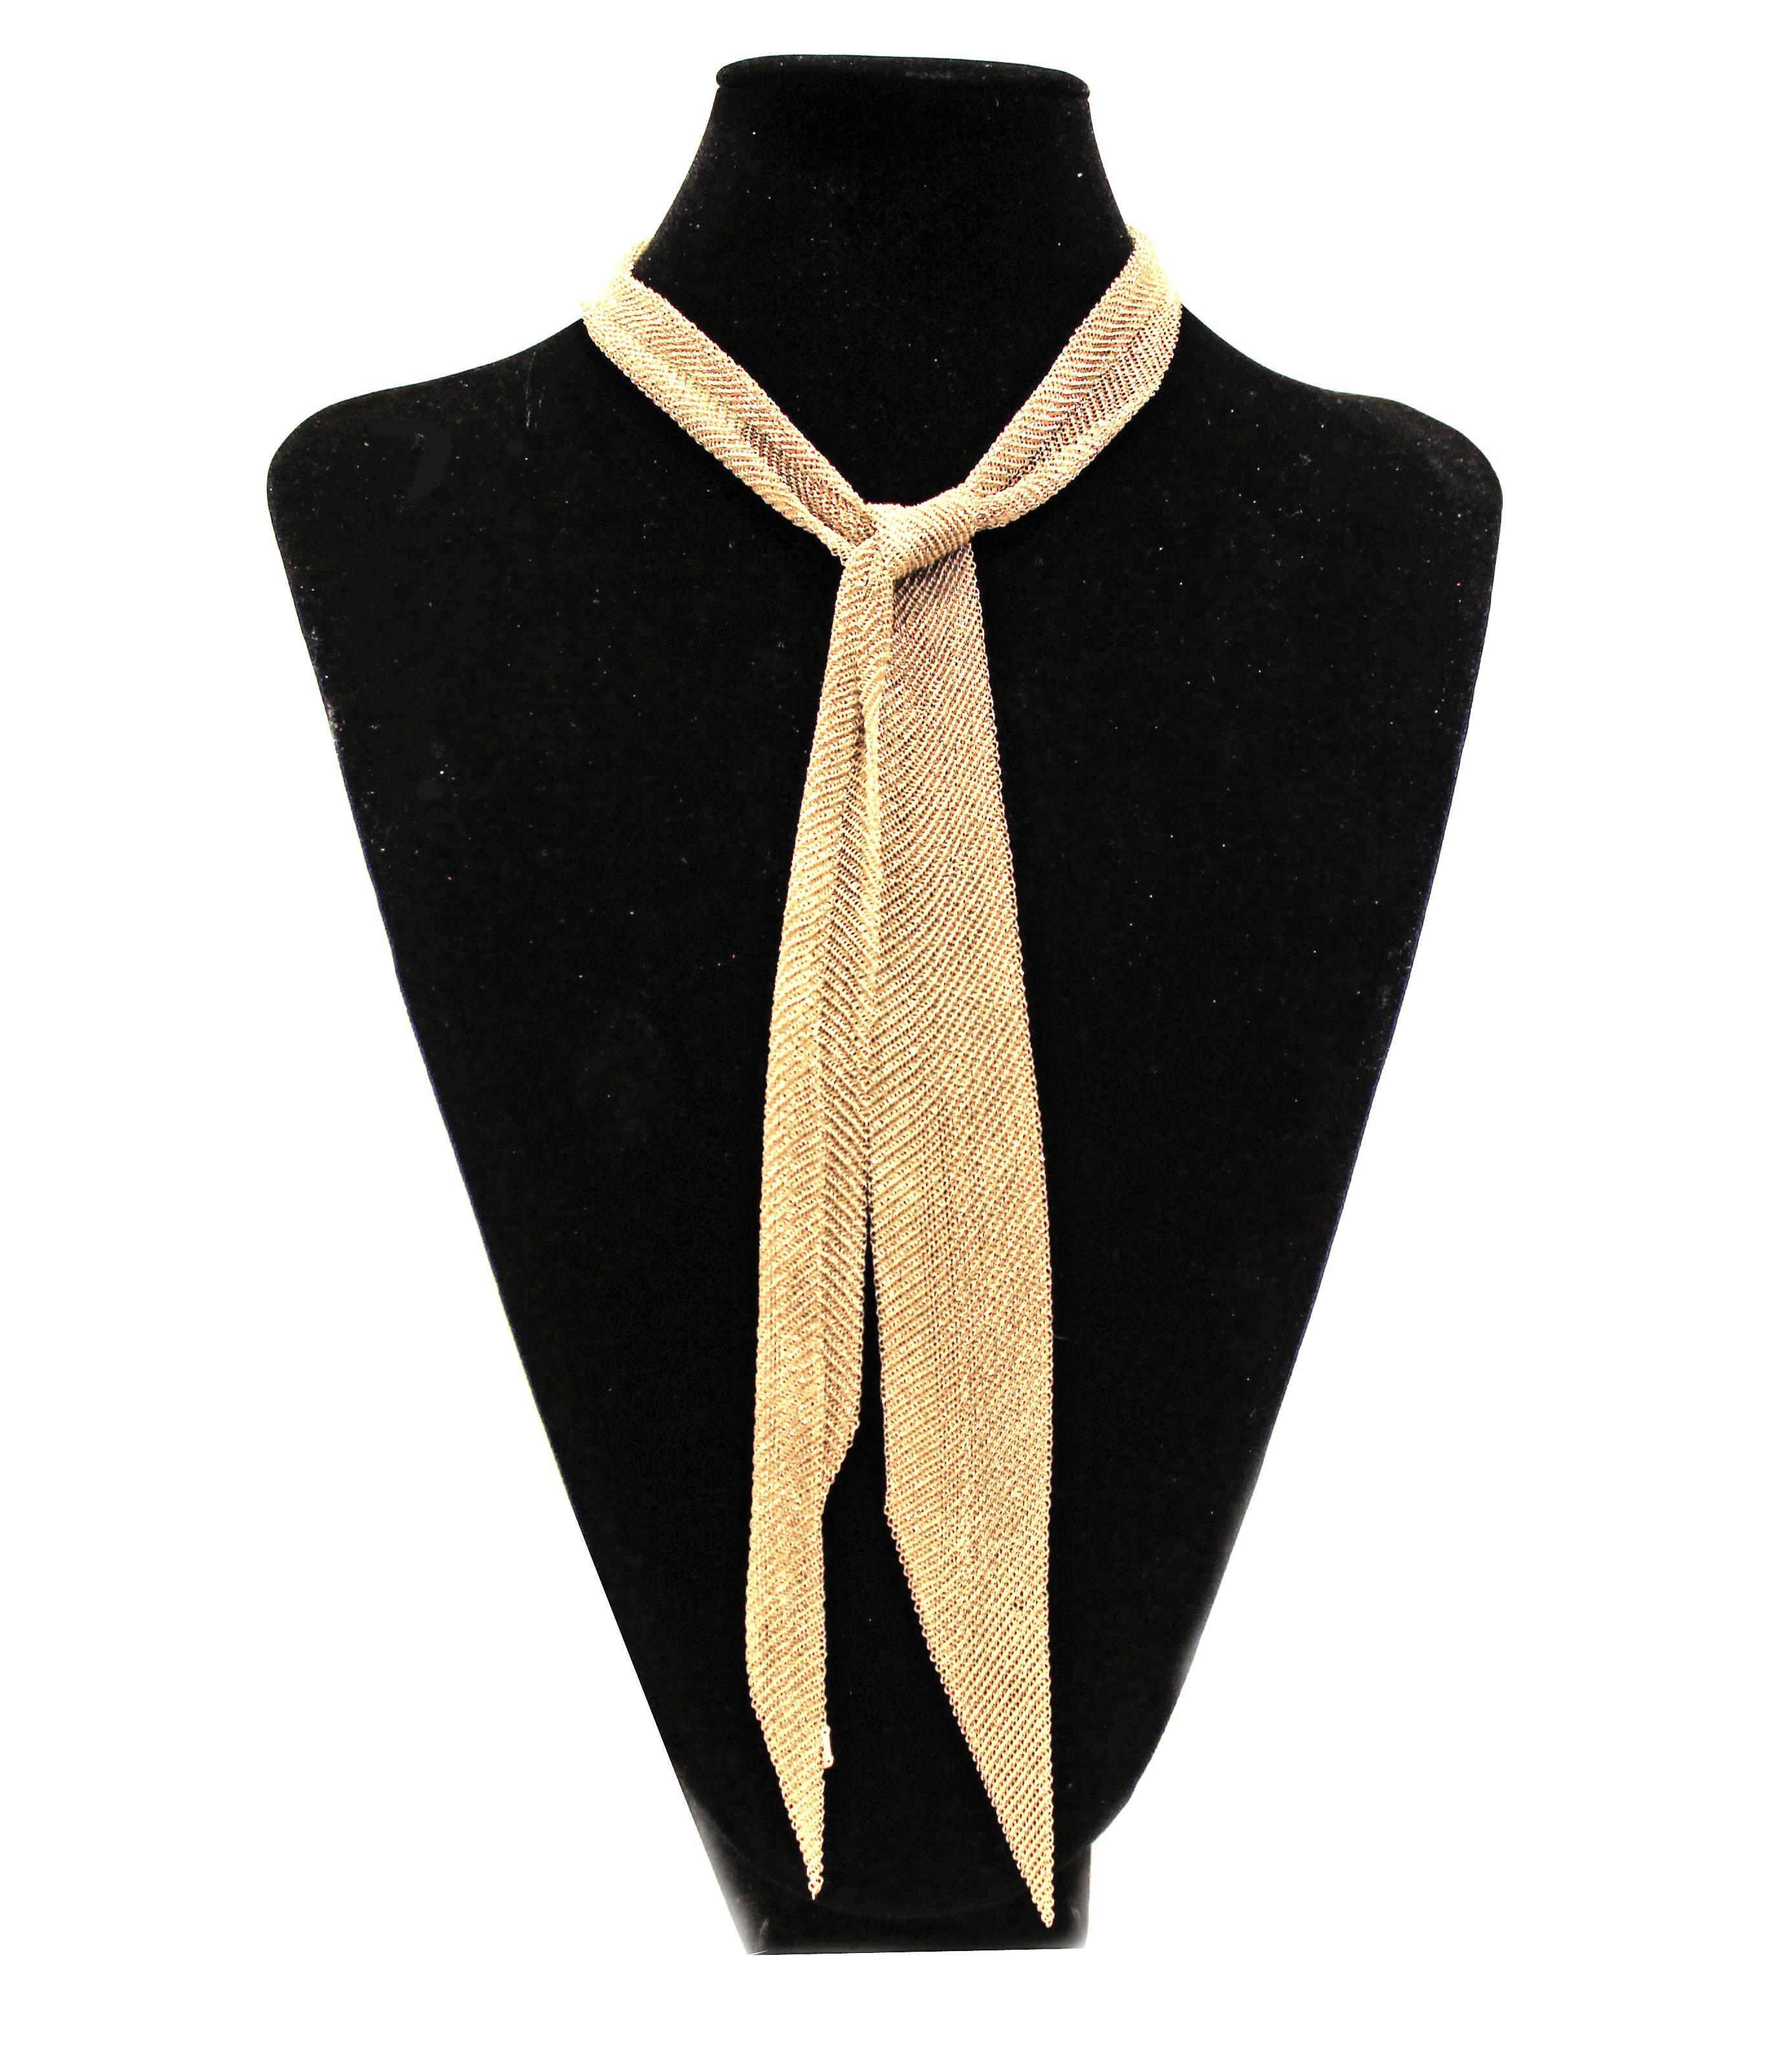 The form is malleable and ergonomic in the way it drapes over the body's contours. Scarf necklace in 18k yellow gold. 38